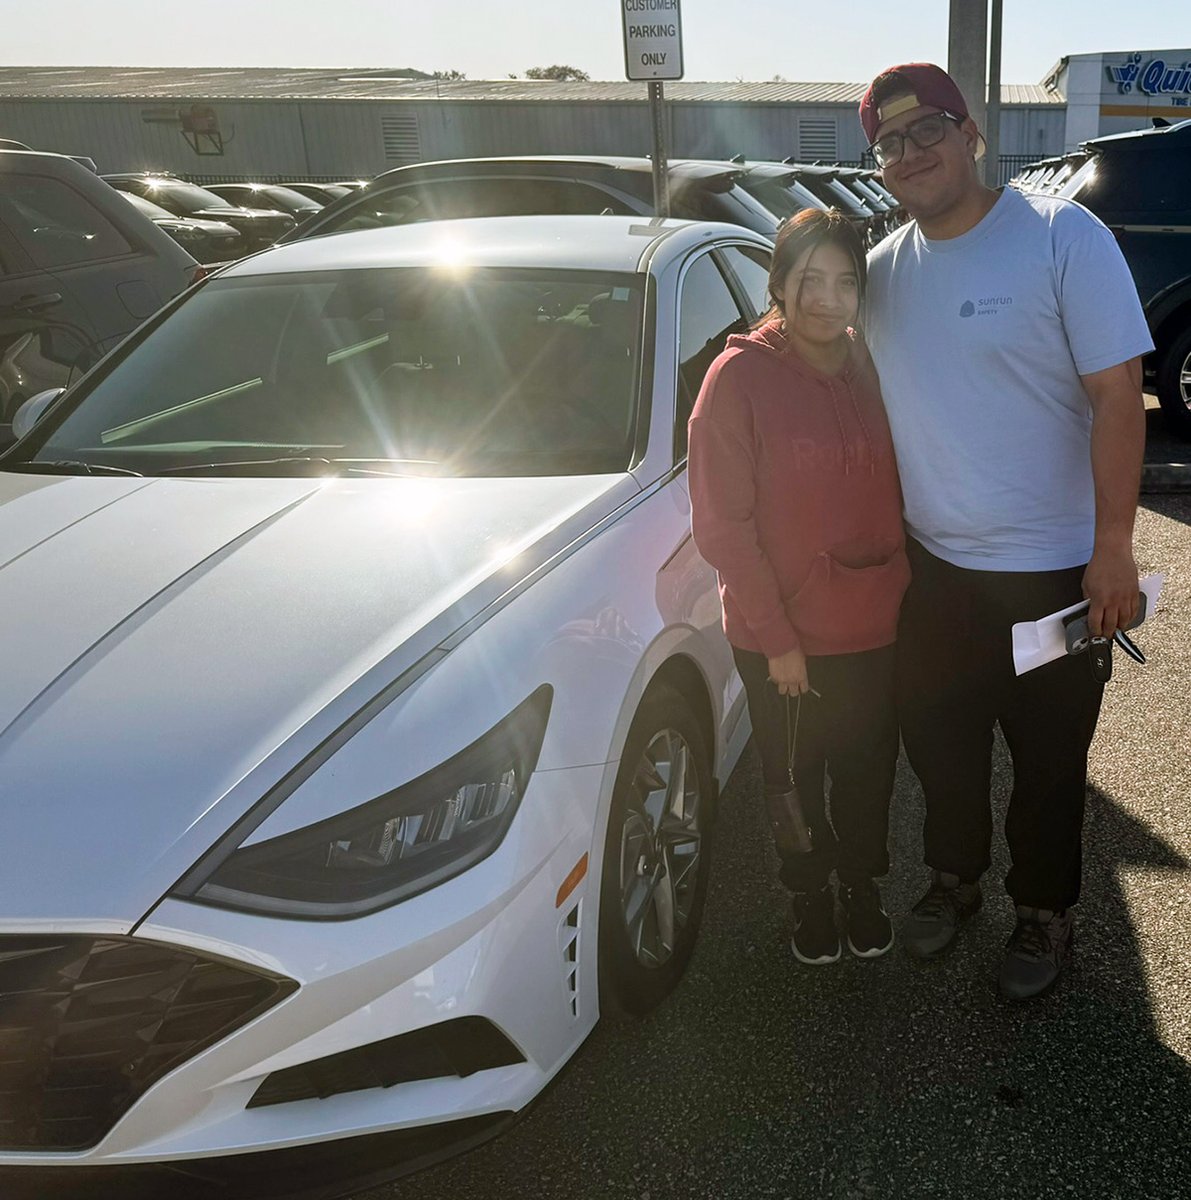 It's always about #GreatService, a #GreatSelection & #GreatDeals at #LakelandAutomall... that's why Miguel Rivera came to us for the #HyundaiSonata that was just what he was looking for & the #PerfectOne! #Congratulations Miguel & #ThankYou - We're here for you! #ShopOnline